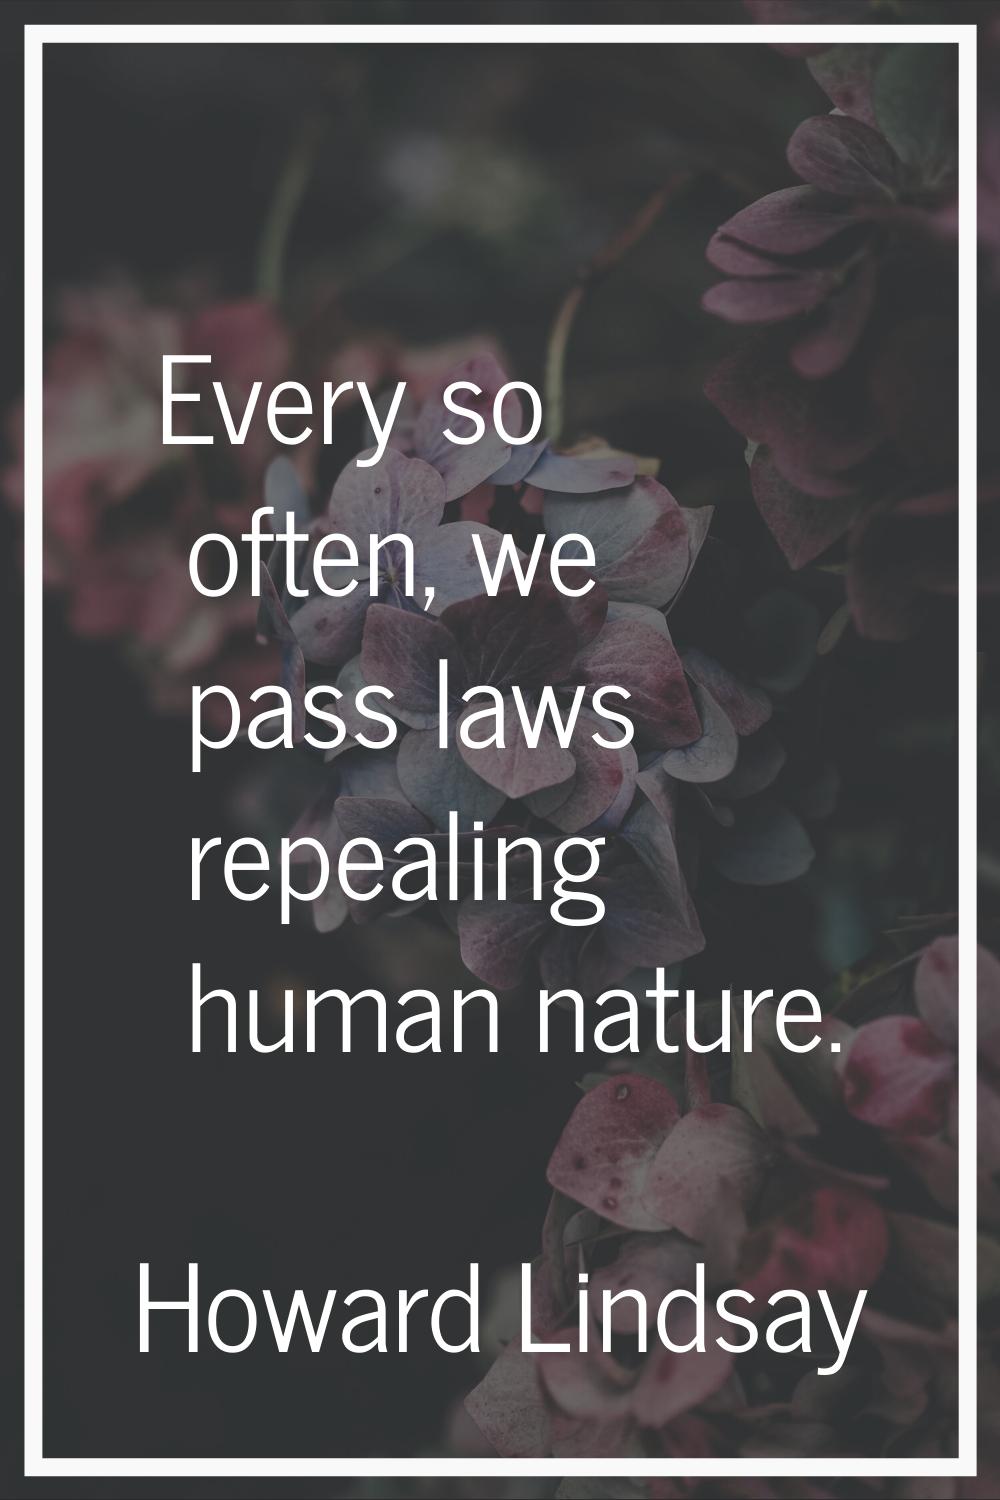 Every so often, we pass laws repealing human nature.